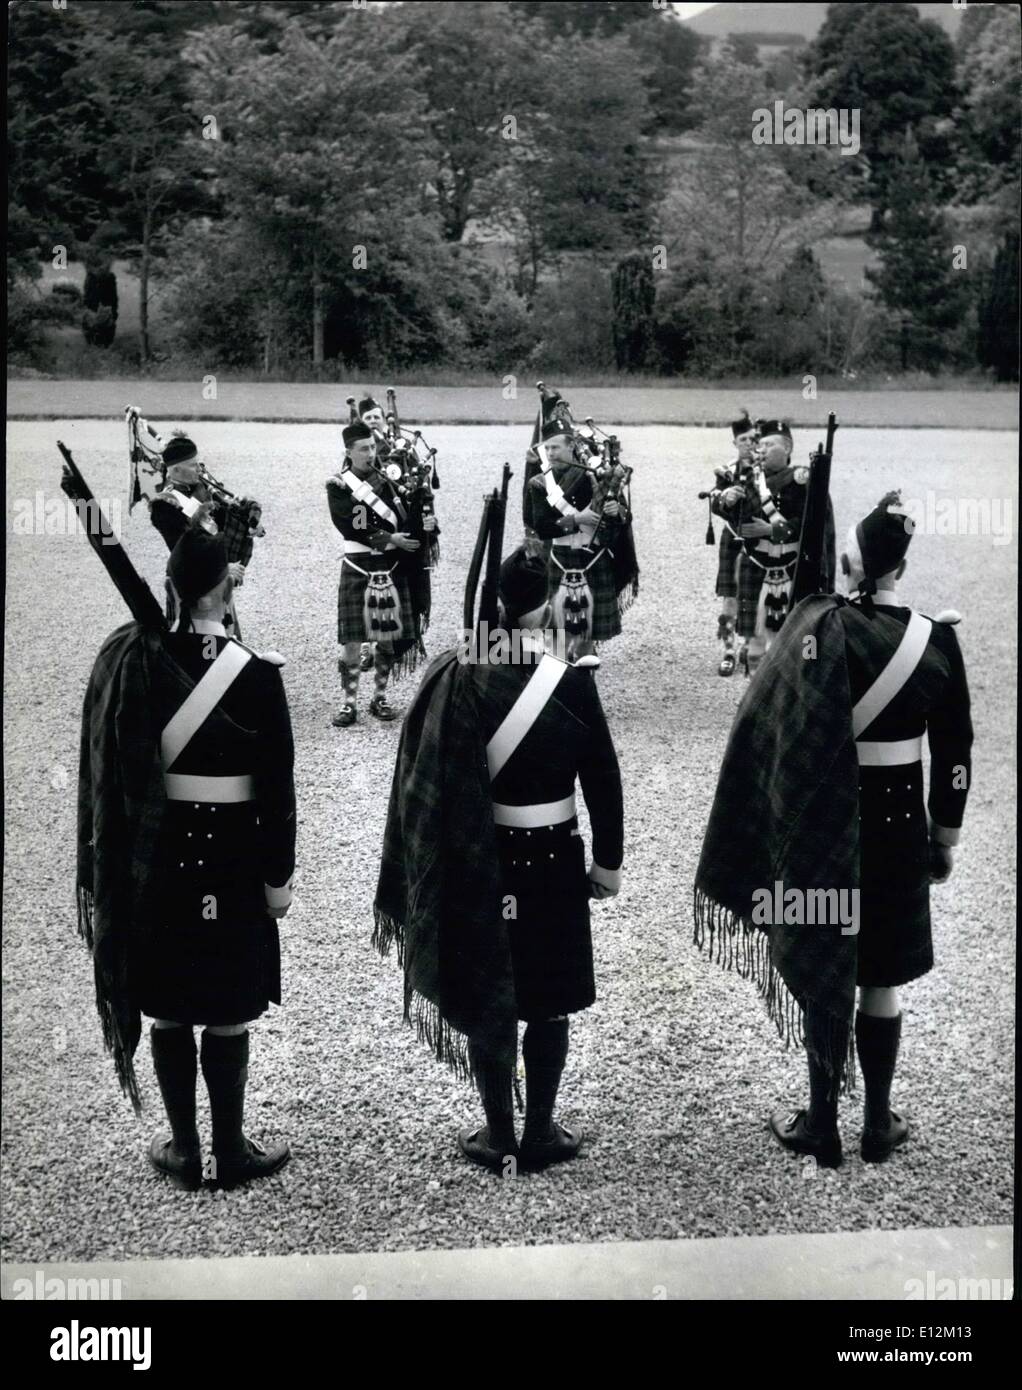 Feb. 24, 2012 - Proud Pipers of the Atholl Highlands play on parade. Stock Photo